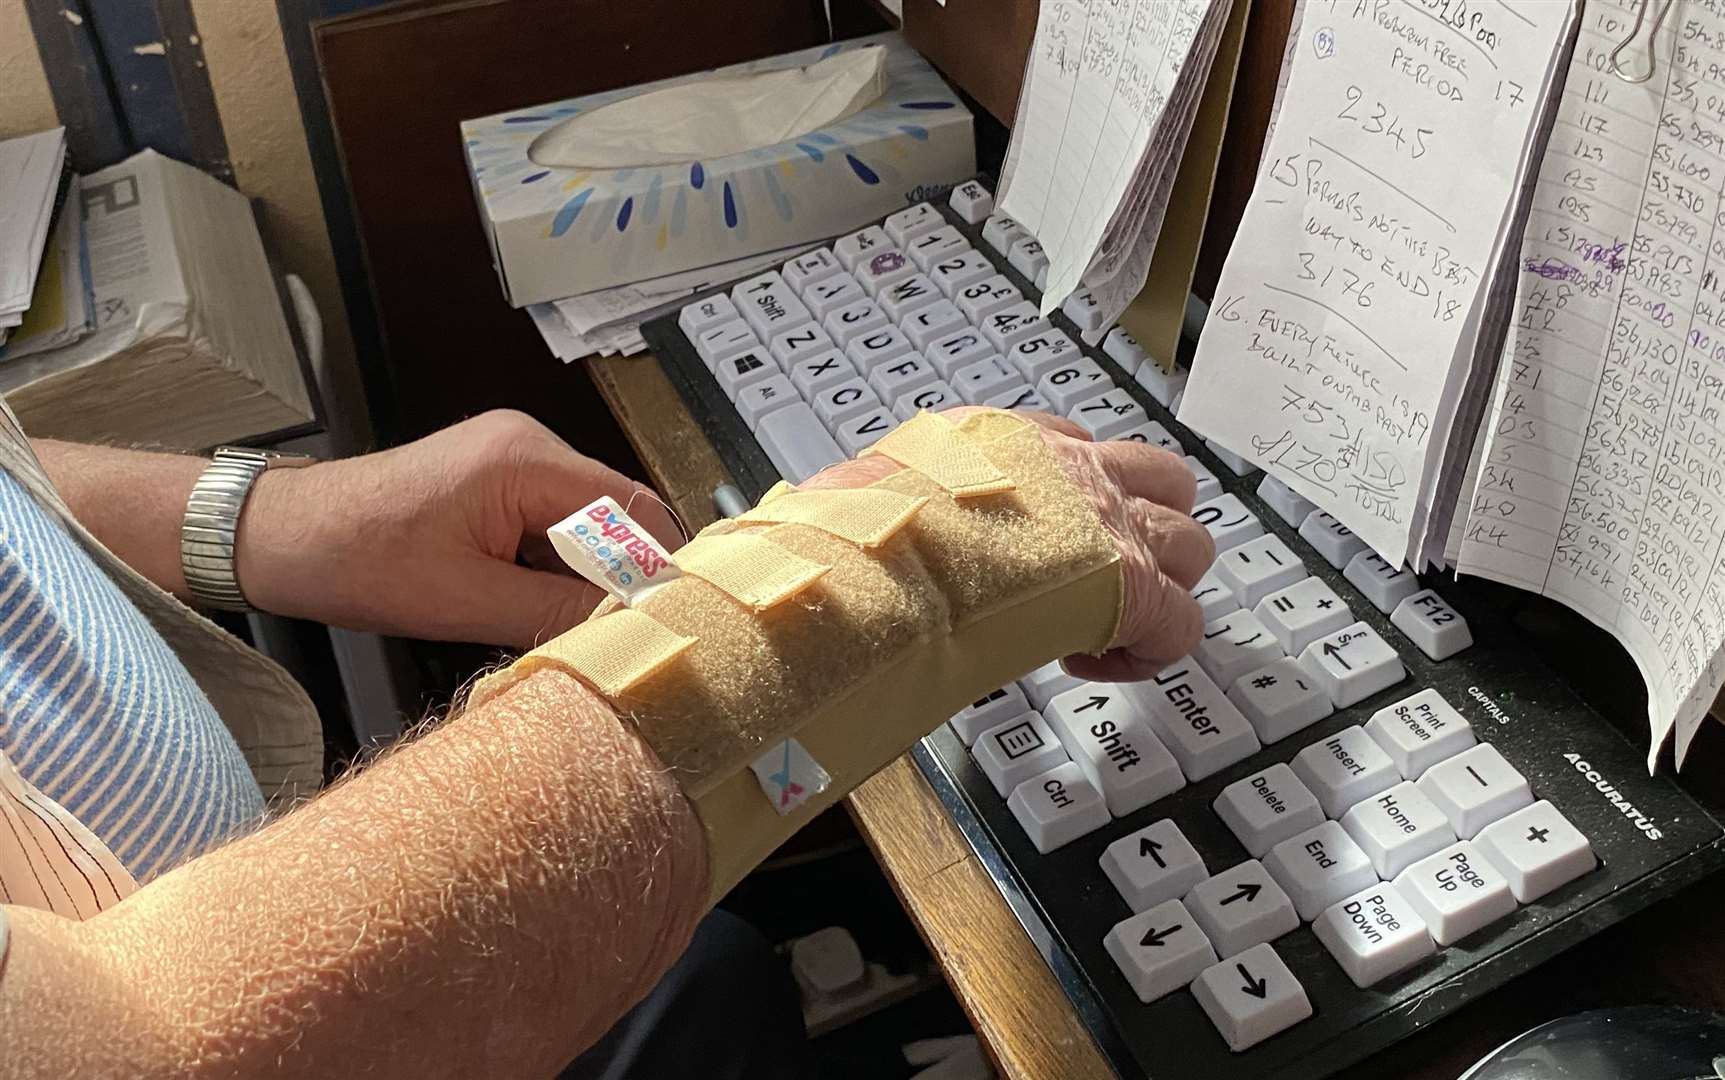 The 82-year-old says he can type up to 2,000 words a day with just one finger